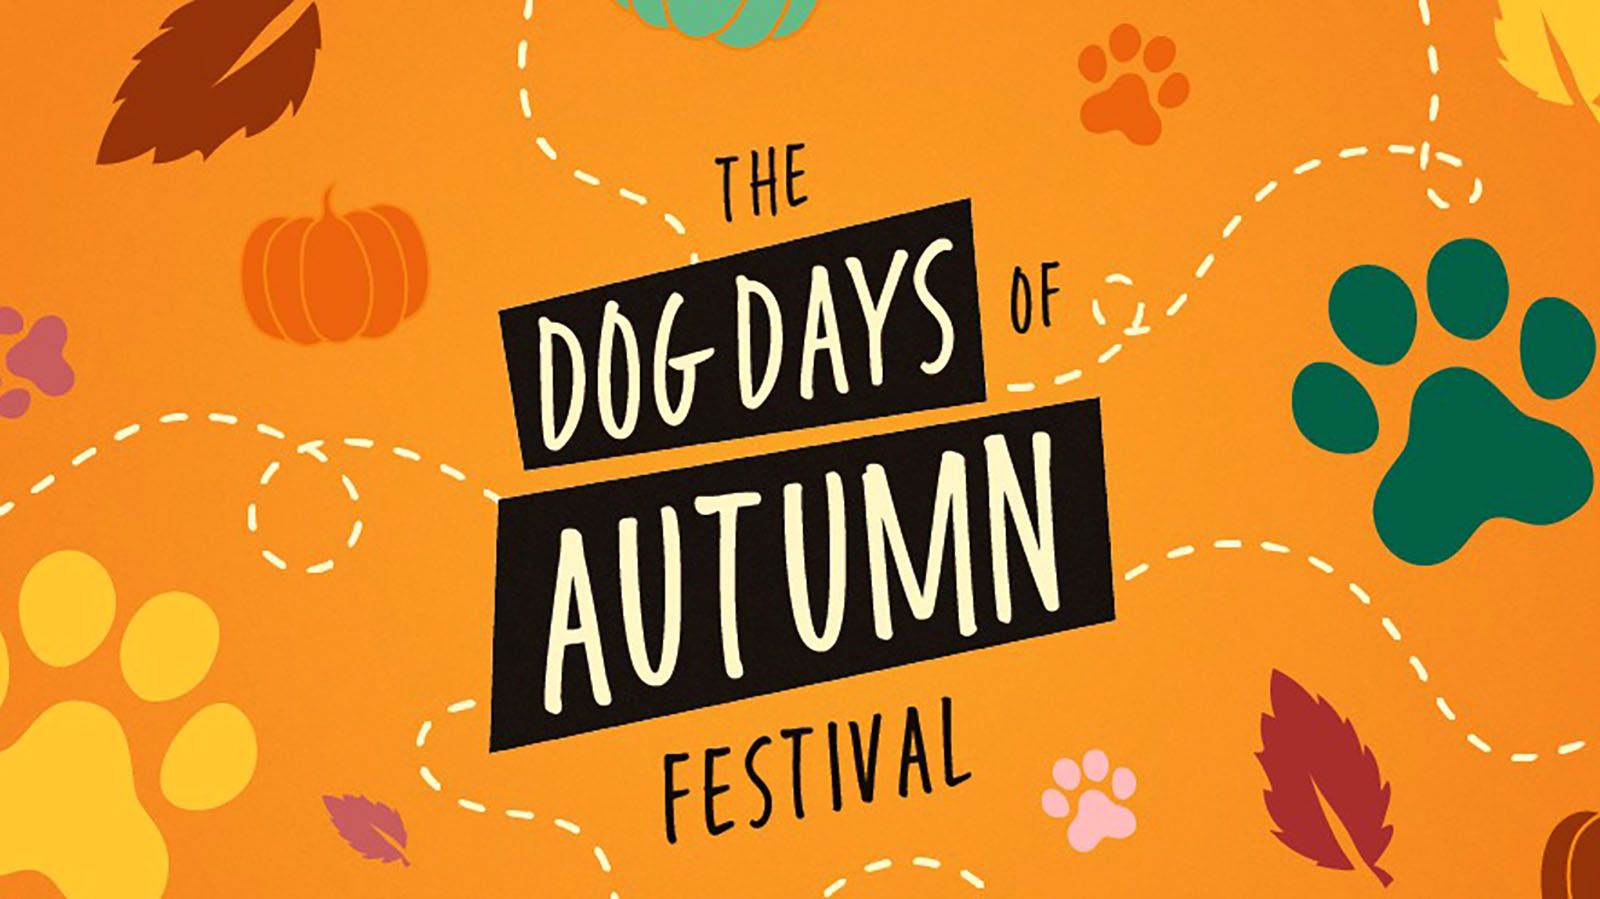 The Dog Days of Autumn Festival will be Oct. 1 at Lutheran Park and Gardens.